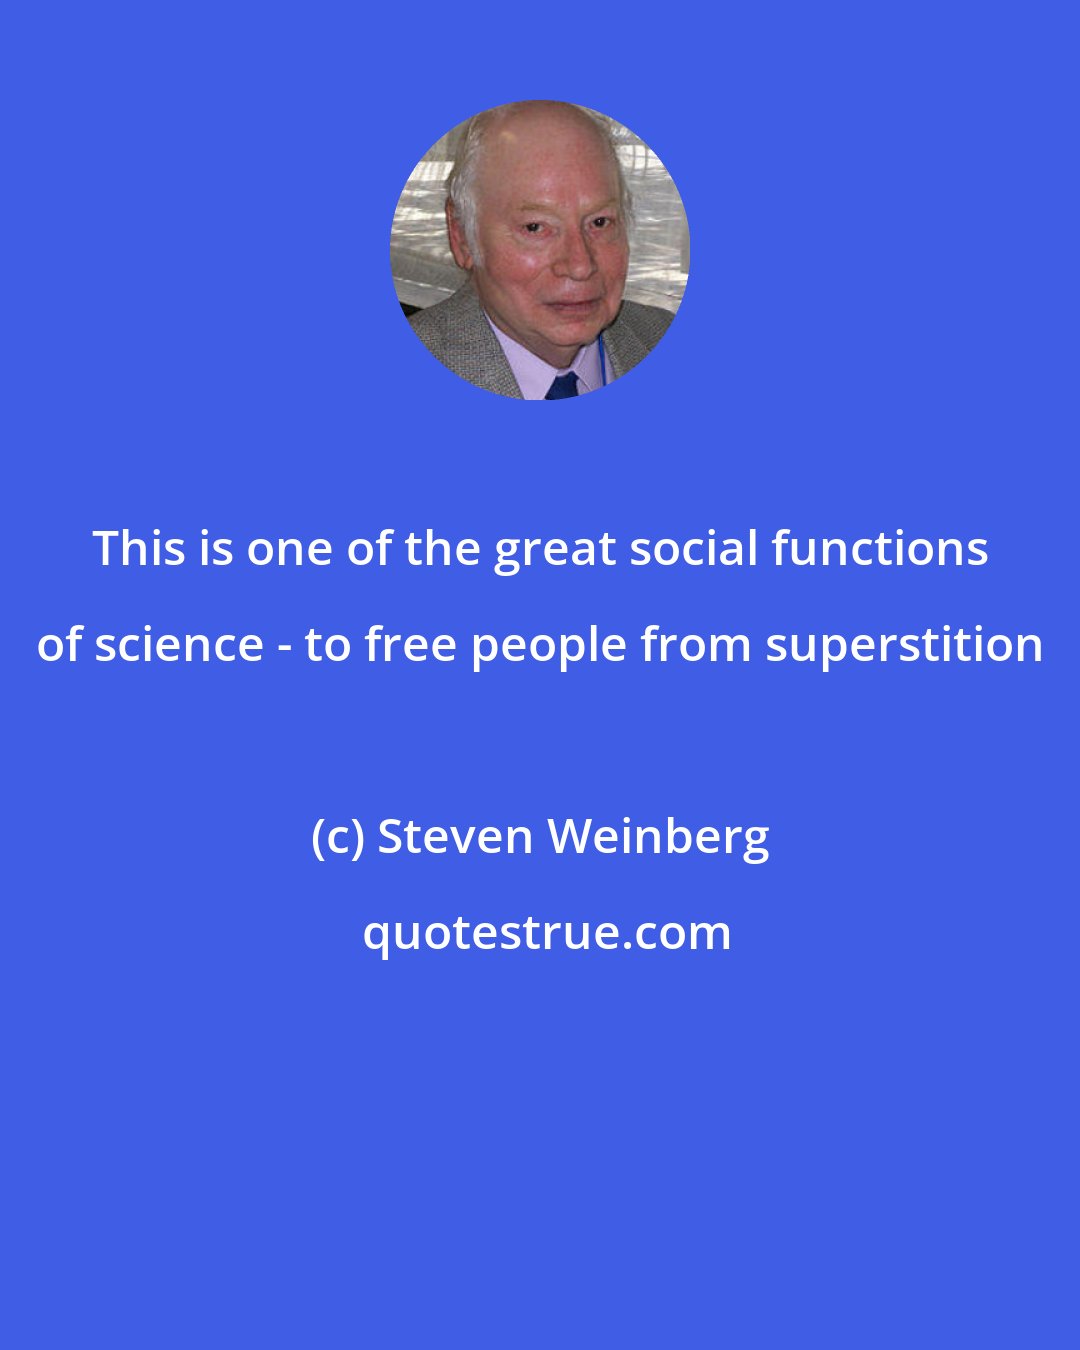 Steven Weinberg: This is one of the great social functions of science - to free people from superstition